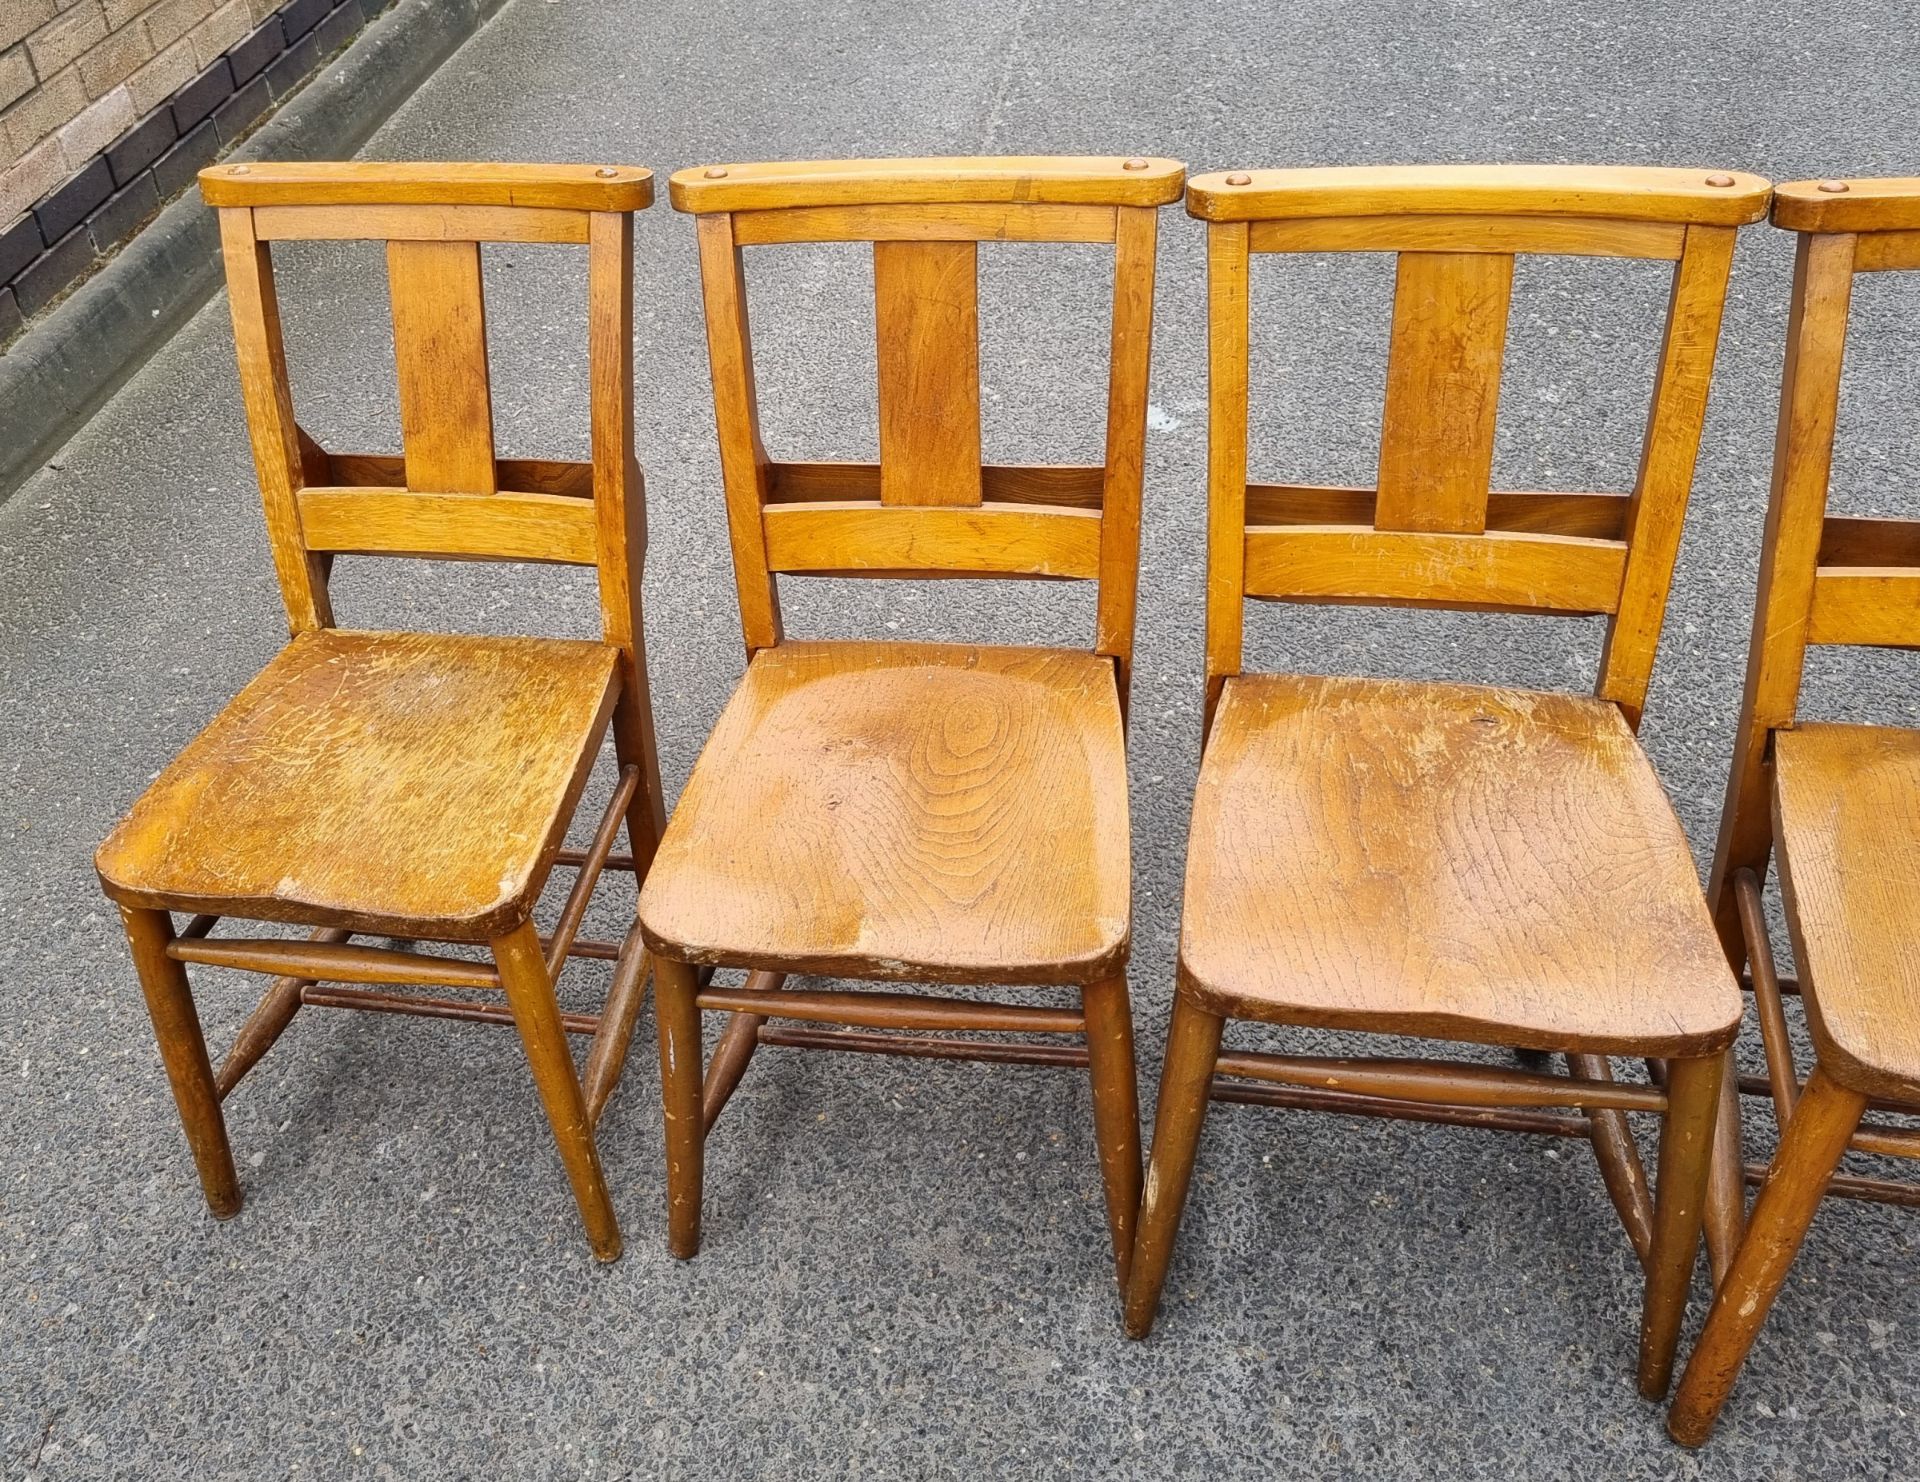 12x Wooden chairs with rear book holder - L 420 x W 420 x H 820mm - Image 10 of 10